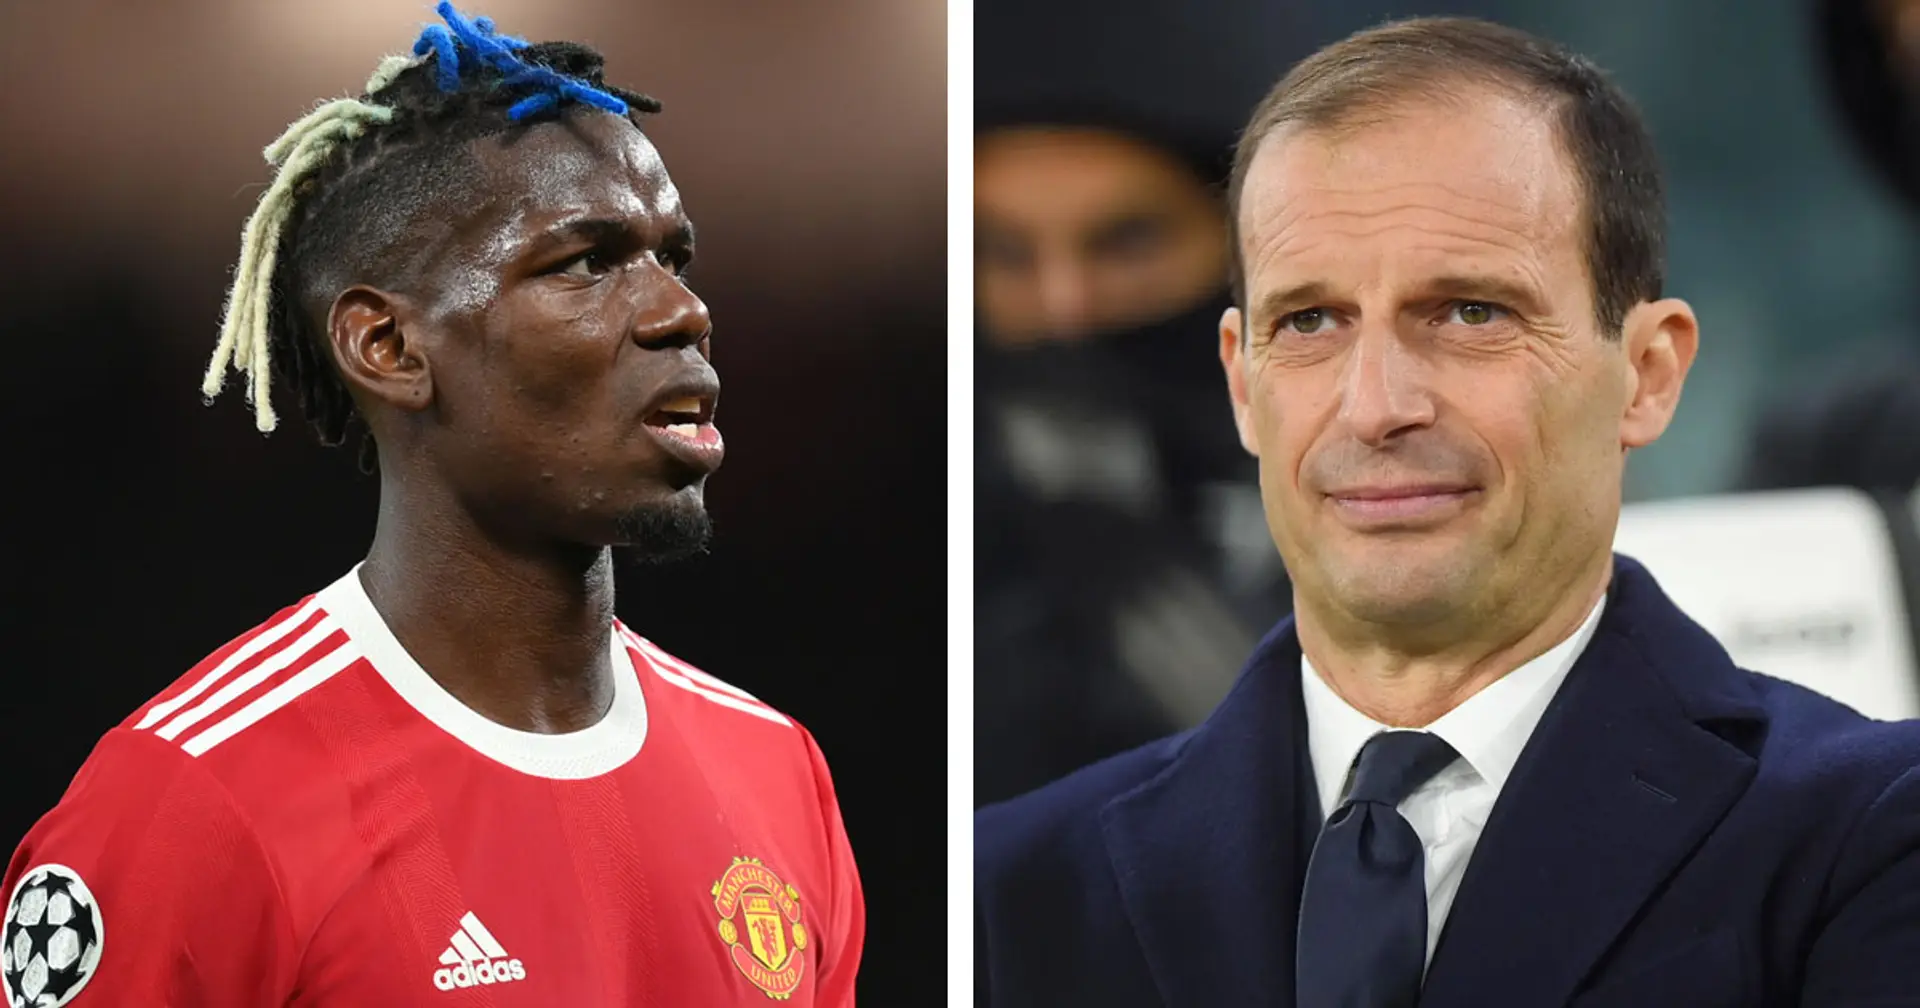 Juventus reportedly want Pogba to take pay-cut and join them in 2022